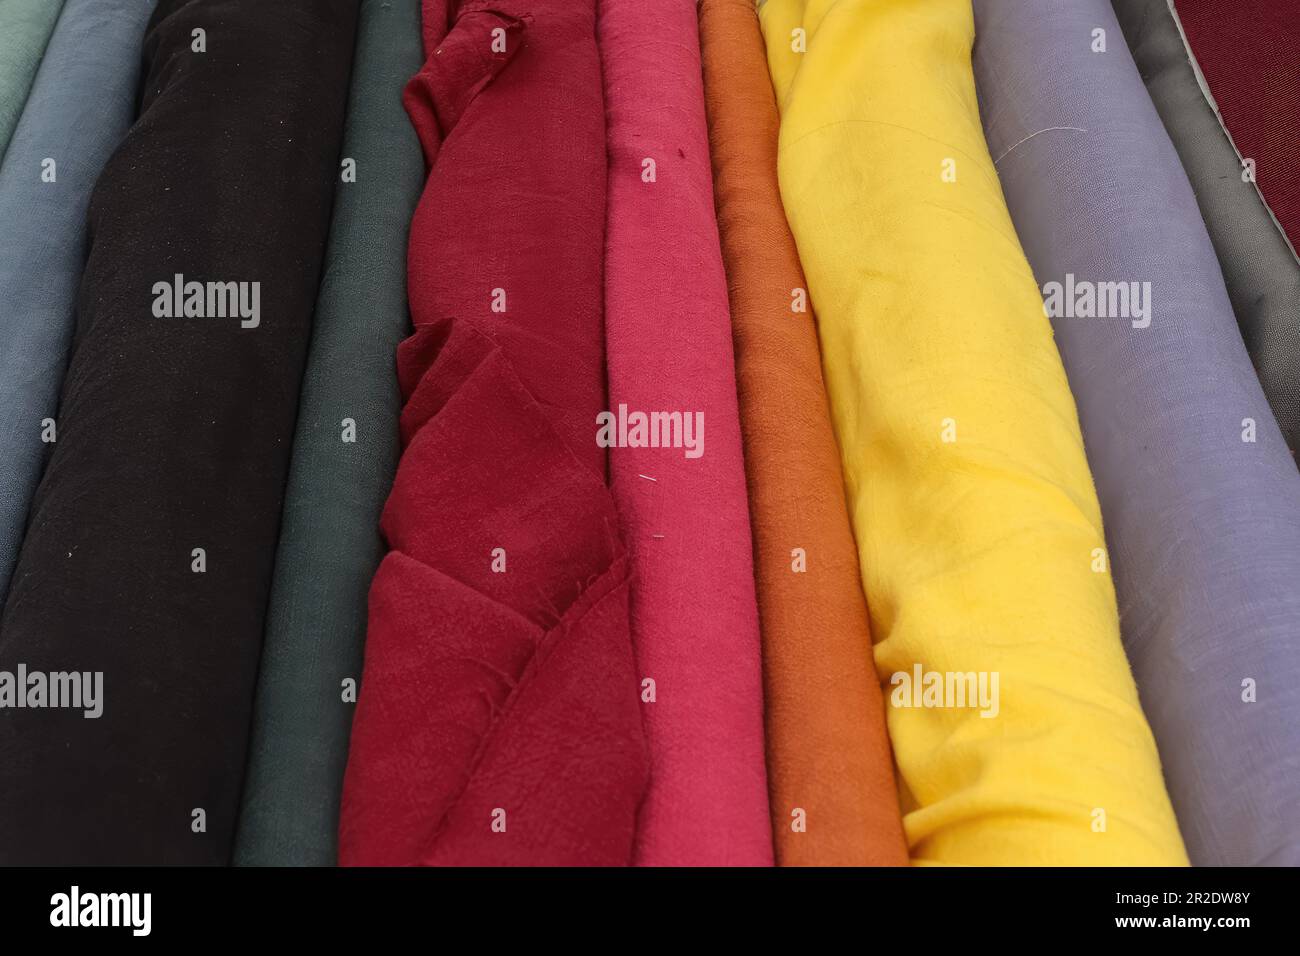 Samples of cloth and fabrics in different colors found at a fabrics market. Stock Photo